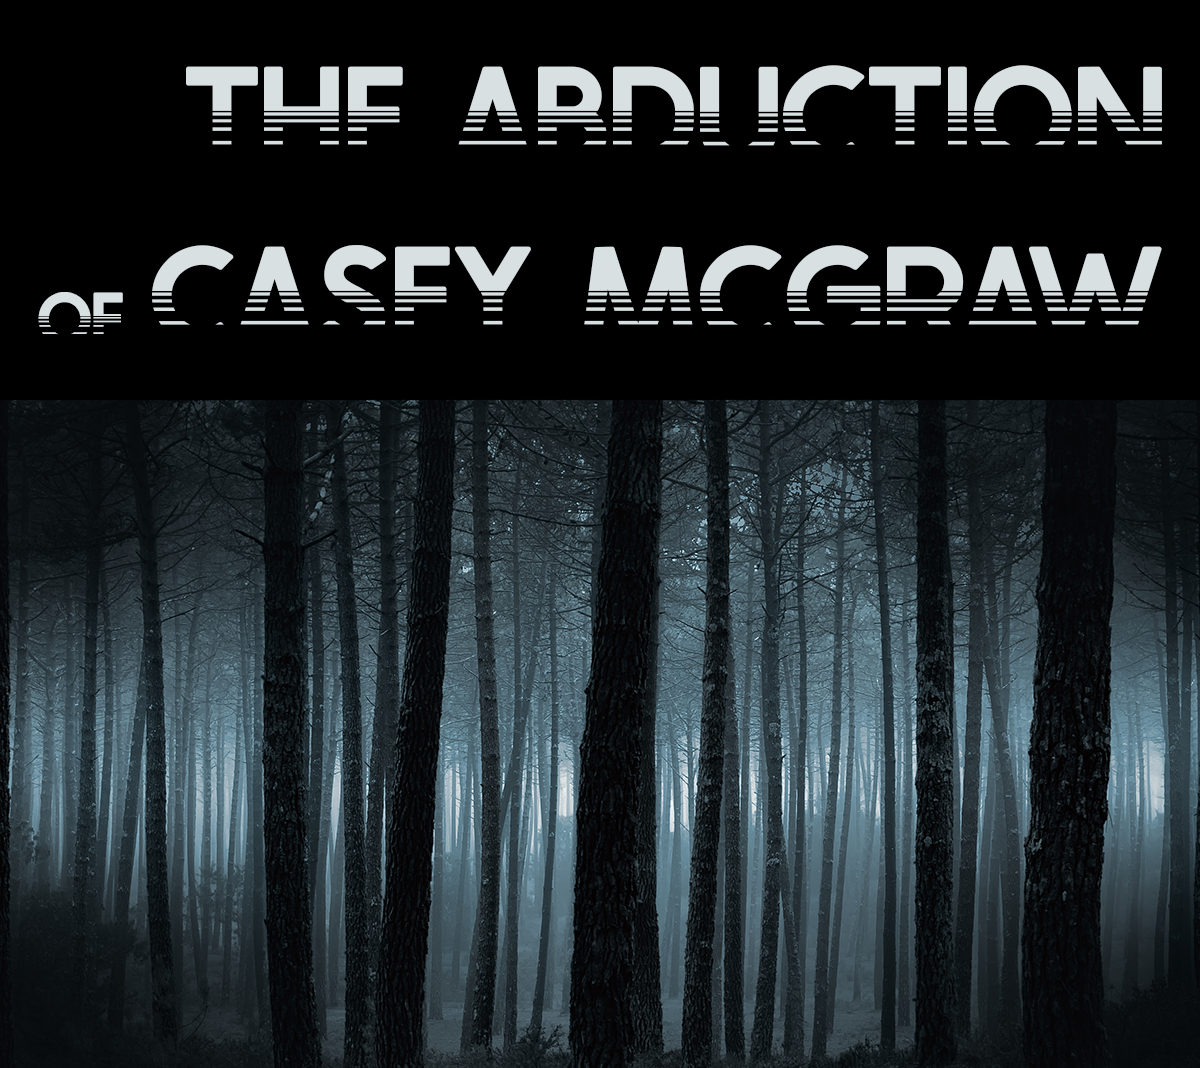 The Abduction of Casey McGraw